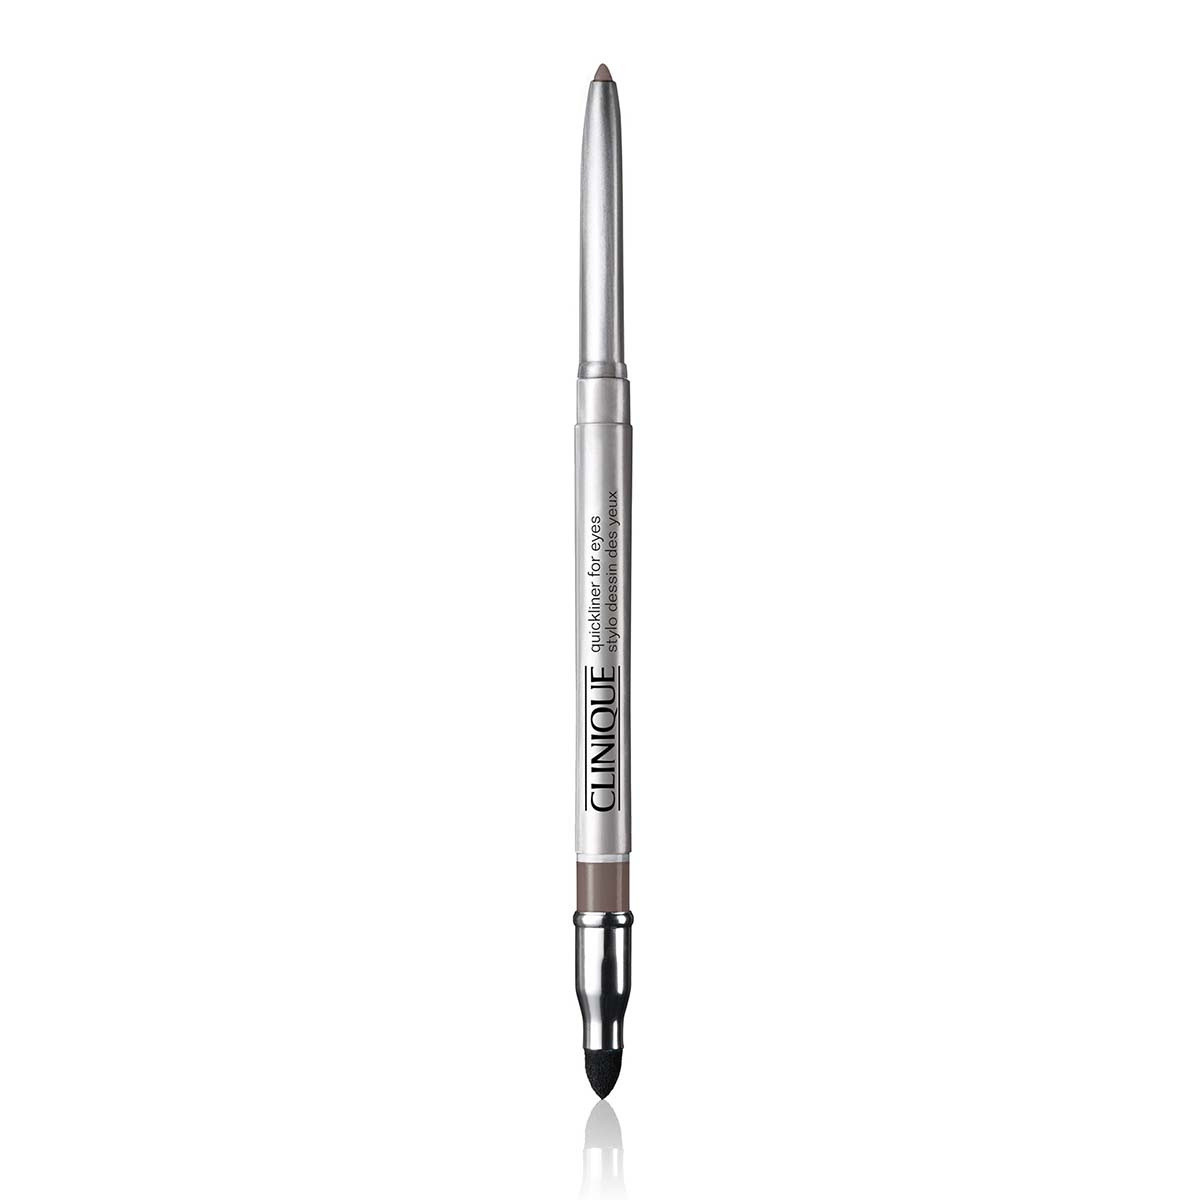 Clinique quickliner for eyes - 02 smoky brown, 02 SMOKY BROWN, large image number 0